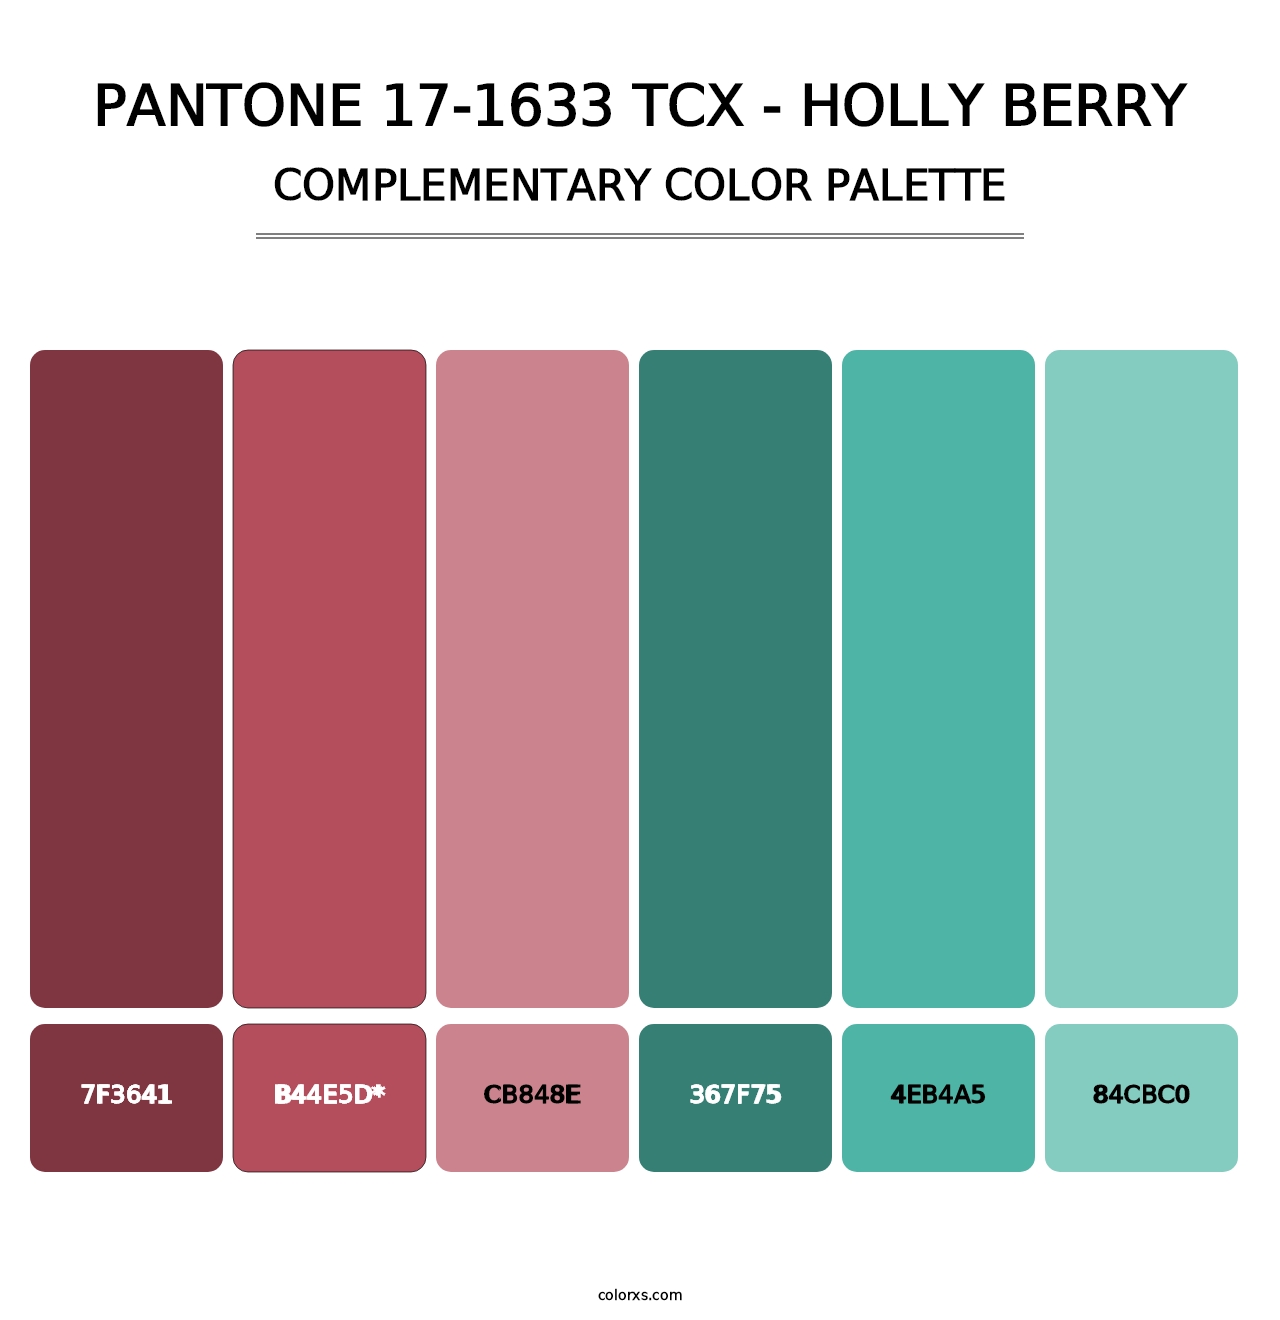 PANTONE 17-1633 TCX - Holly Berry - Complementary Color Palette